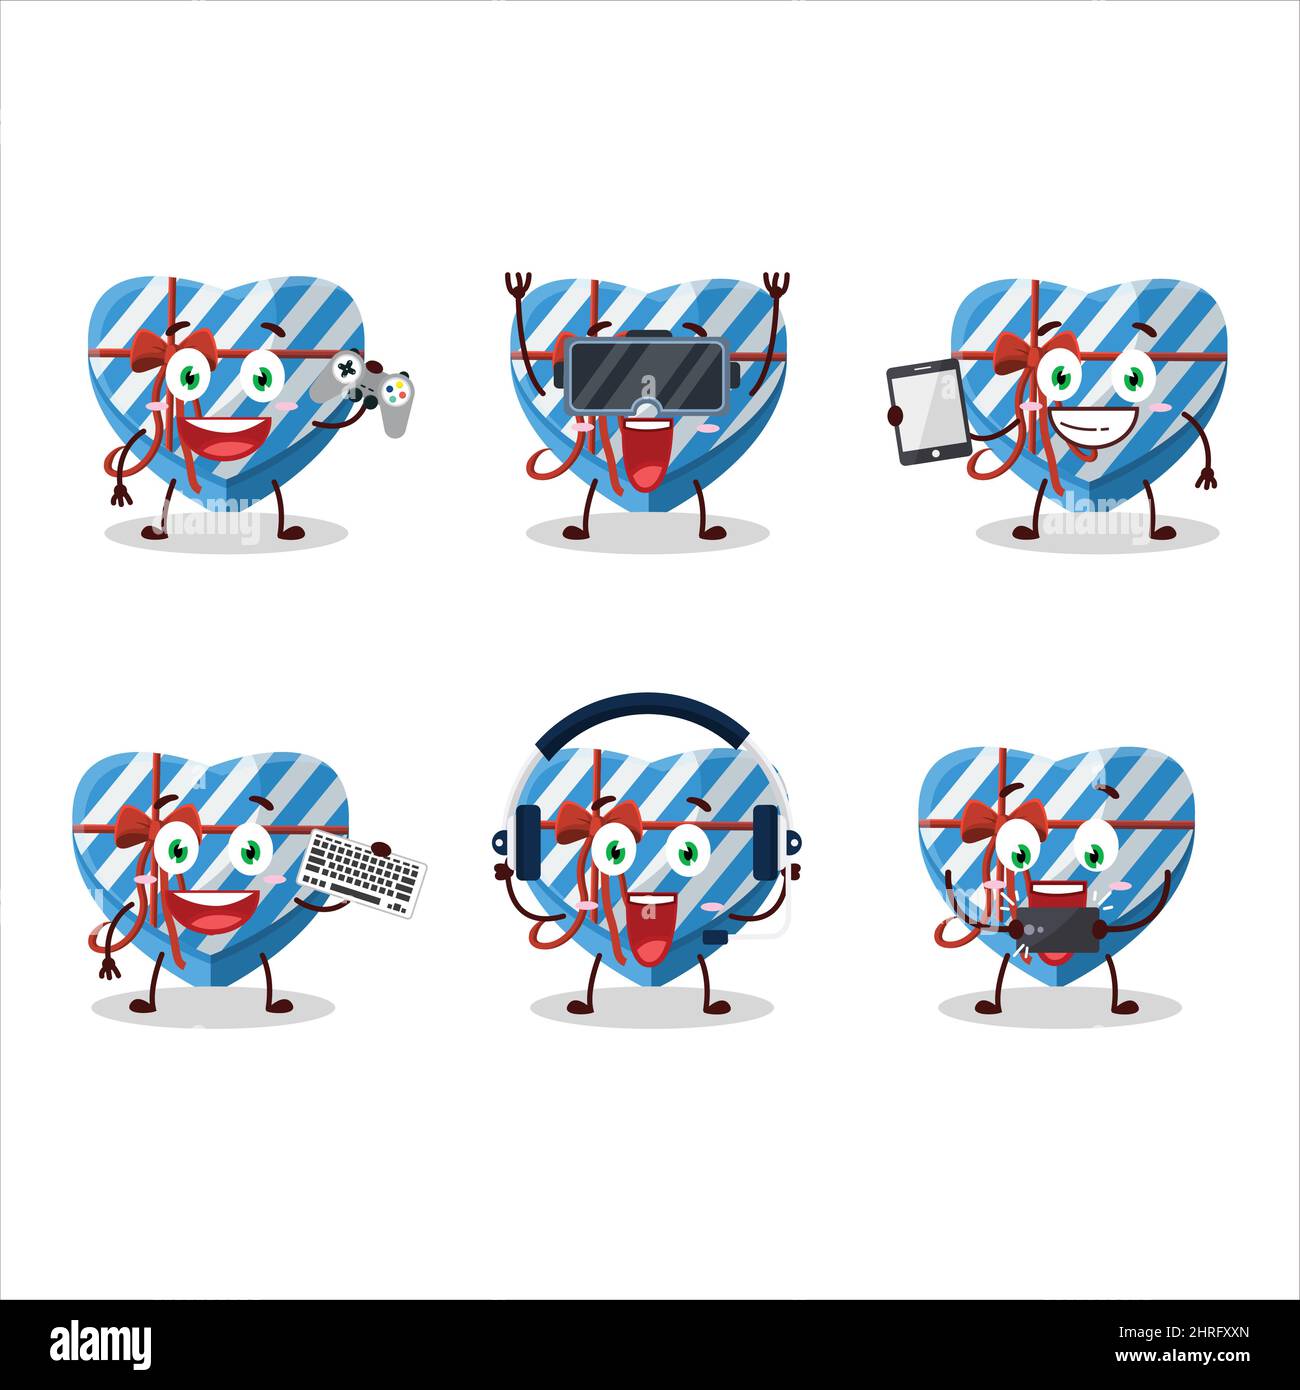 Blue love gift box cartoon character are playing games with various cute emoticons. Vector illustration Stock Vector